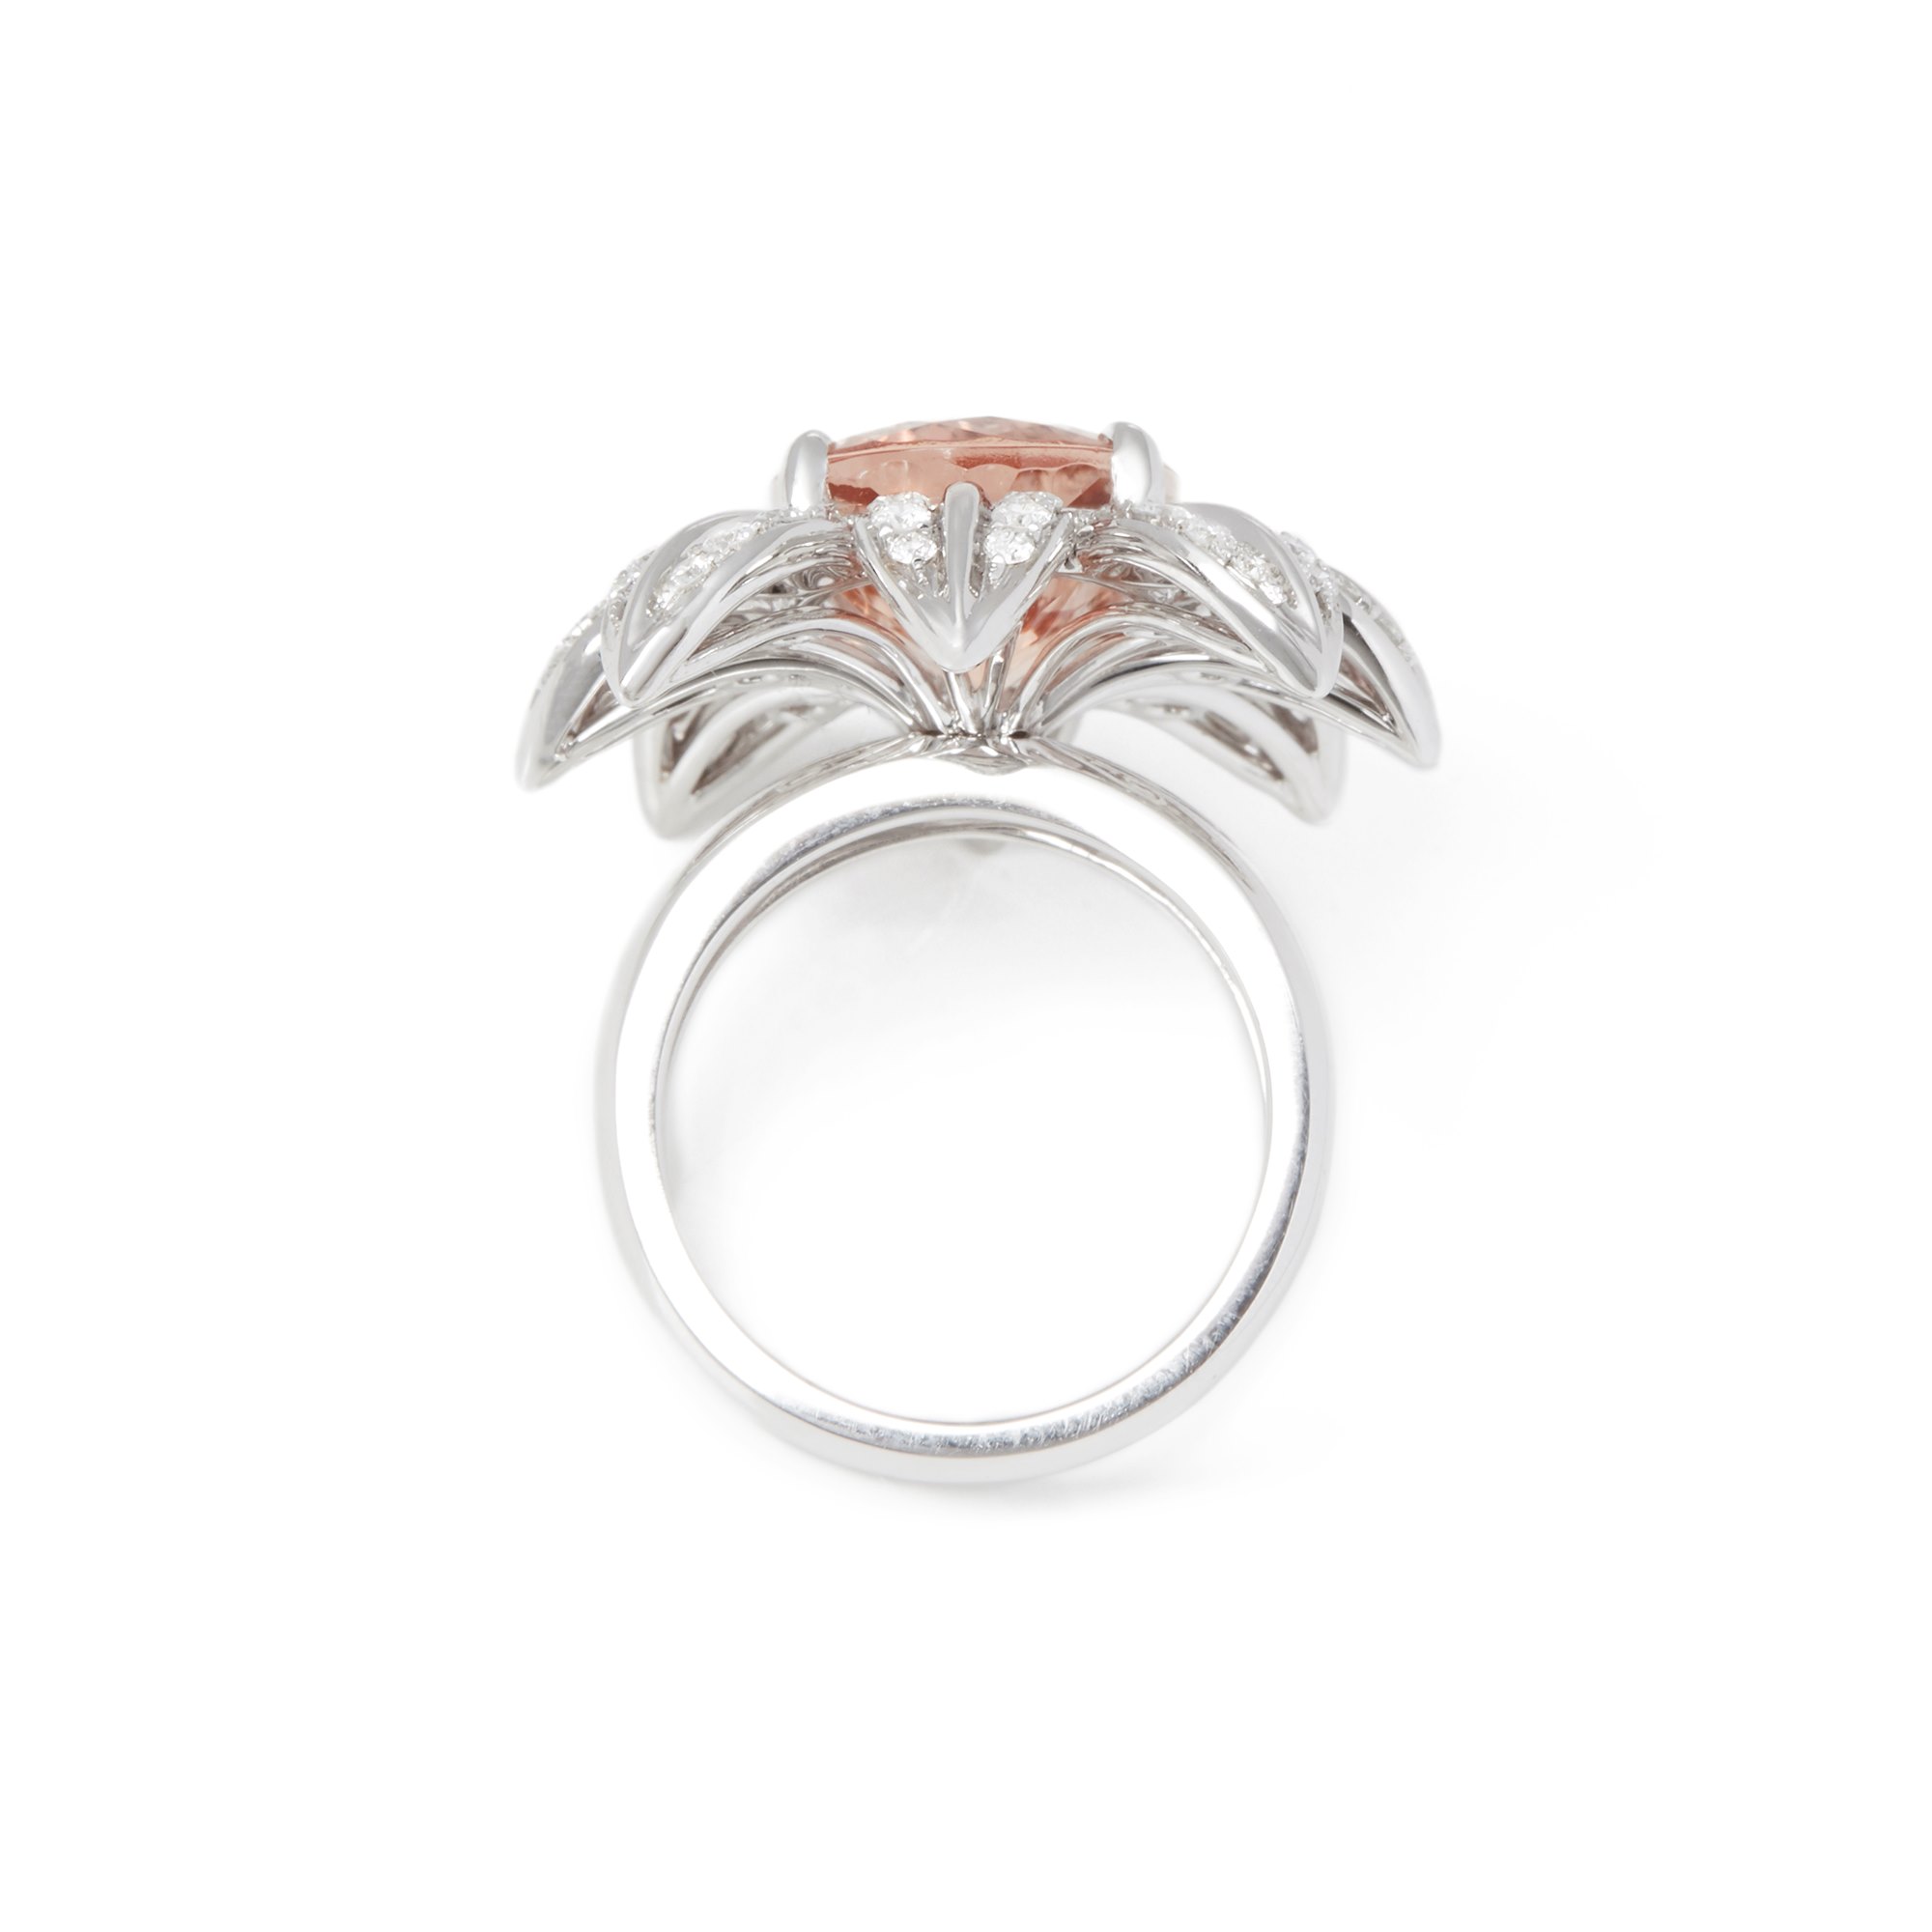 David Jerome Certified 8.86ct Oval Cut Morganite and Diamond 18ct Gold Ring